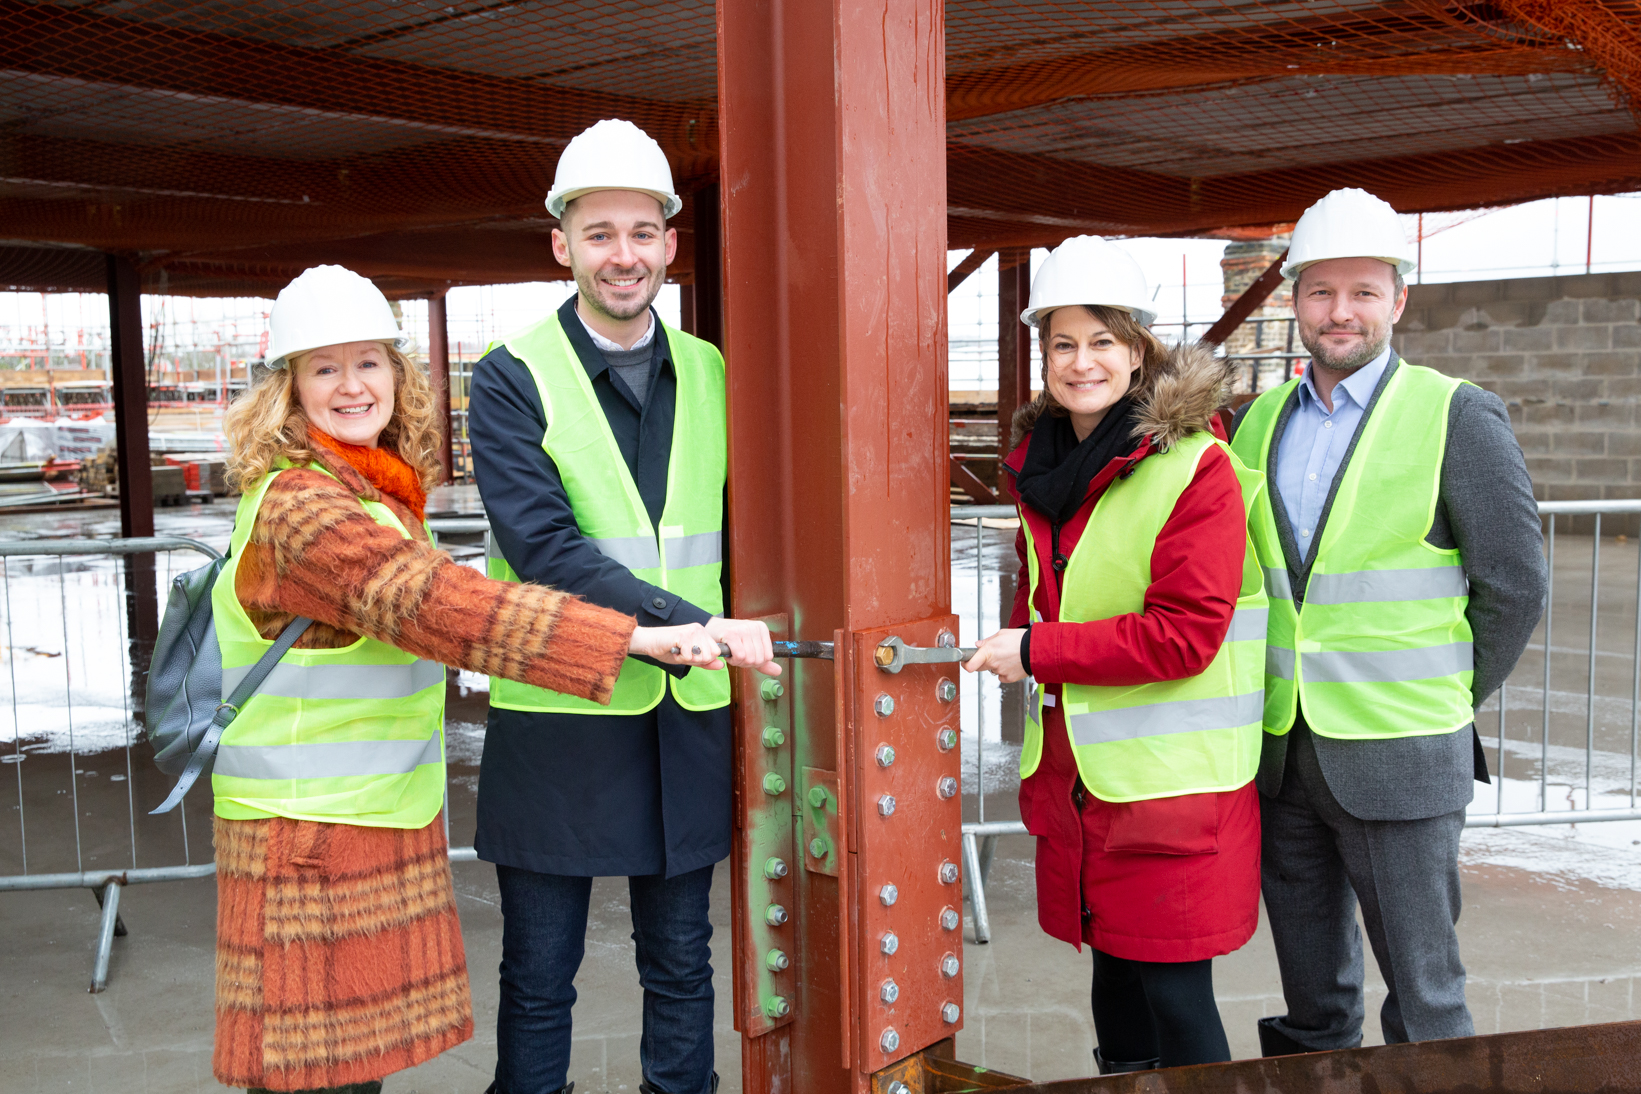 Topping out ceremony for new theatre development on Coldharbour Lane, Brixton